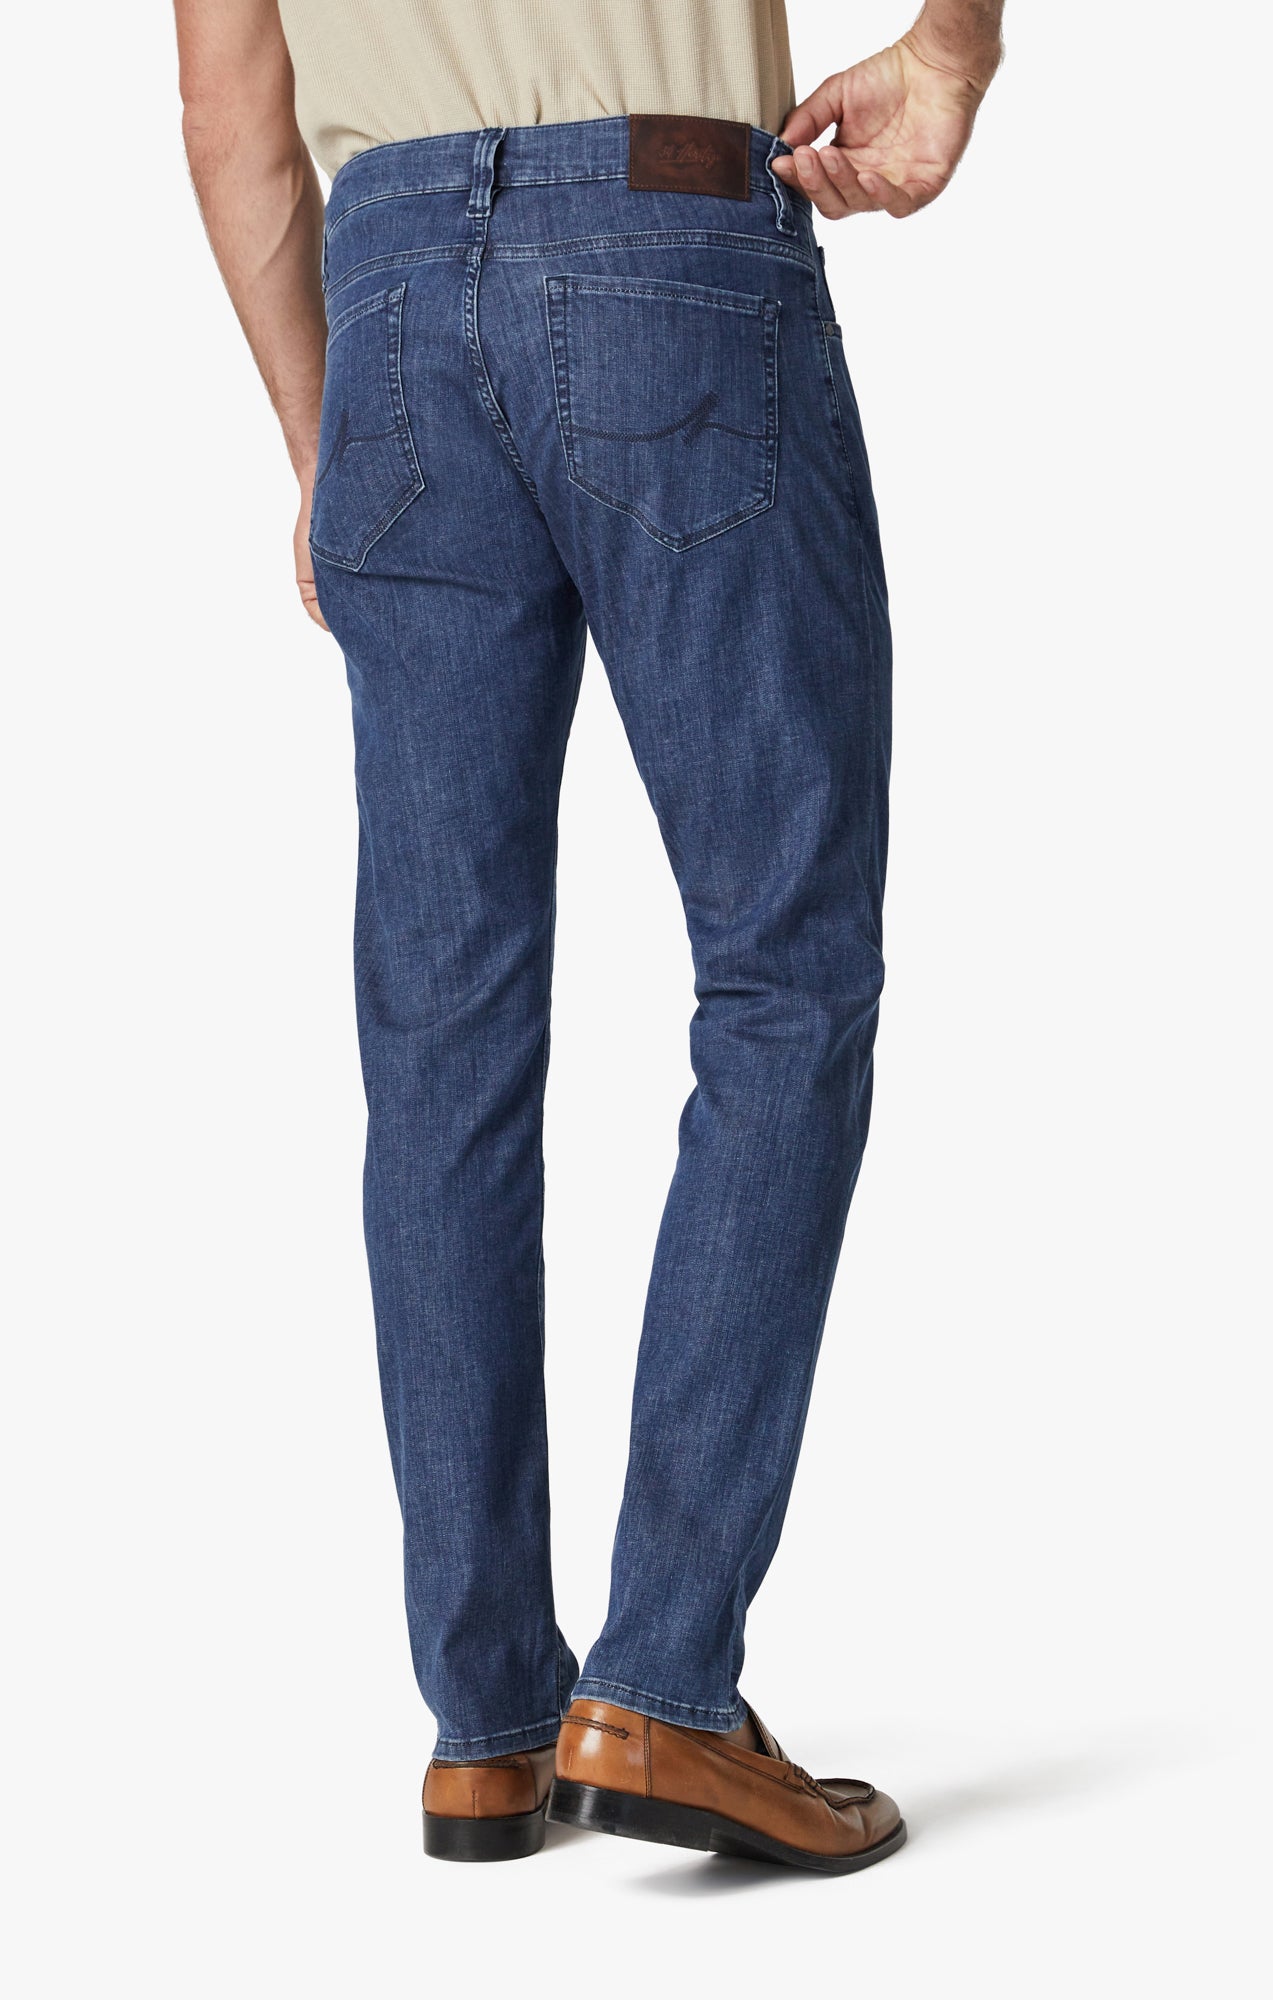 Charisma Relaxed Straight Leg Jeans In Mid Kona Image 5